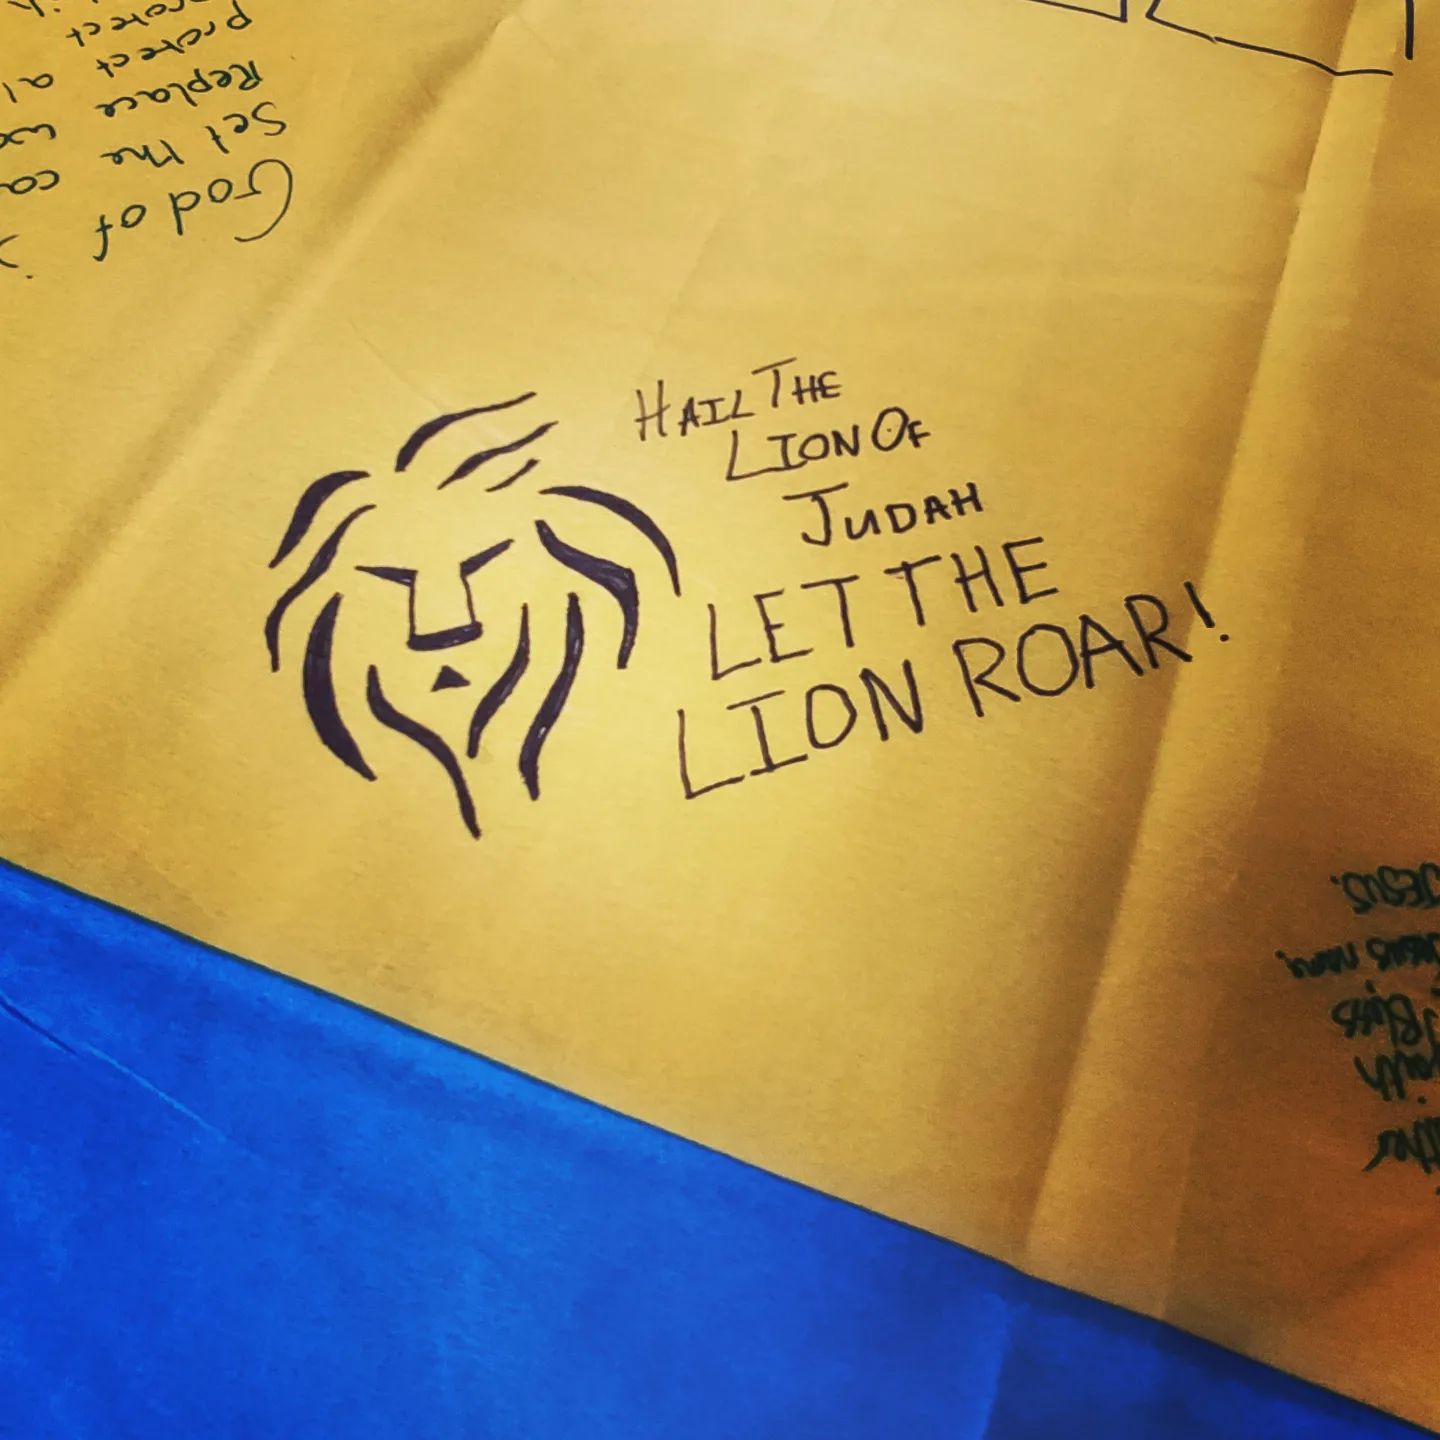 We've had a Ukrainian flag in the dining room at @trinity_bristol that folks have been decorating with prayers.Not knowing quite what or how to begin to pray, I was really encouraged with the @elevationworship "Lion" album and the title track. A simple reminder of the sovereignty, glory and justice of God. So that is what I prayed… #LetTheLionRoar #prayforukraine #prayforpeace